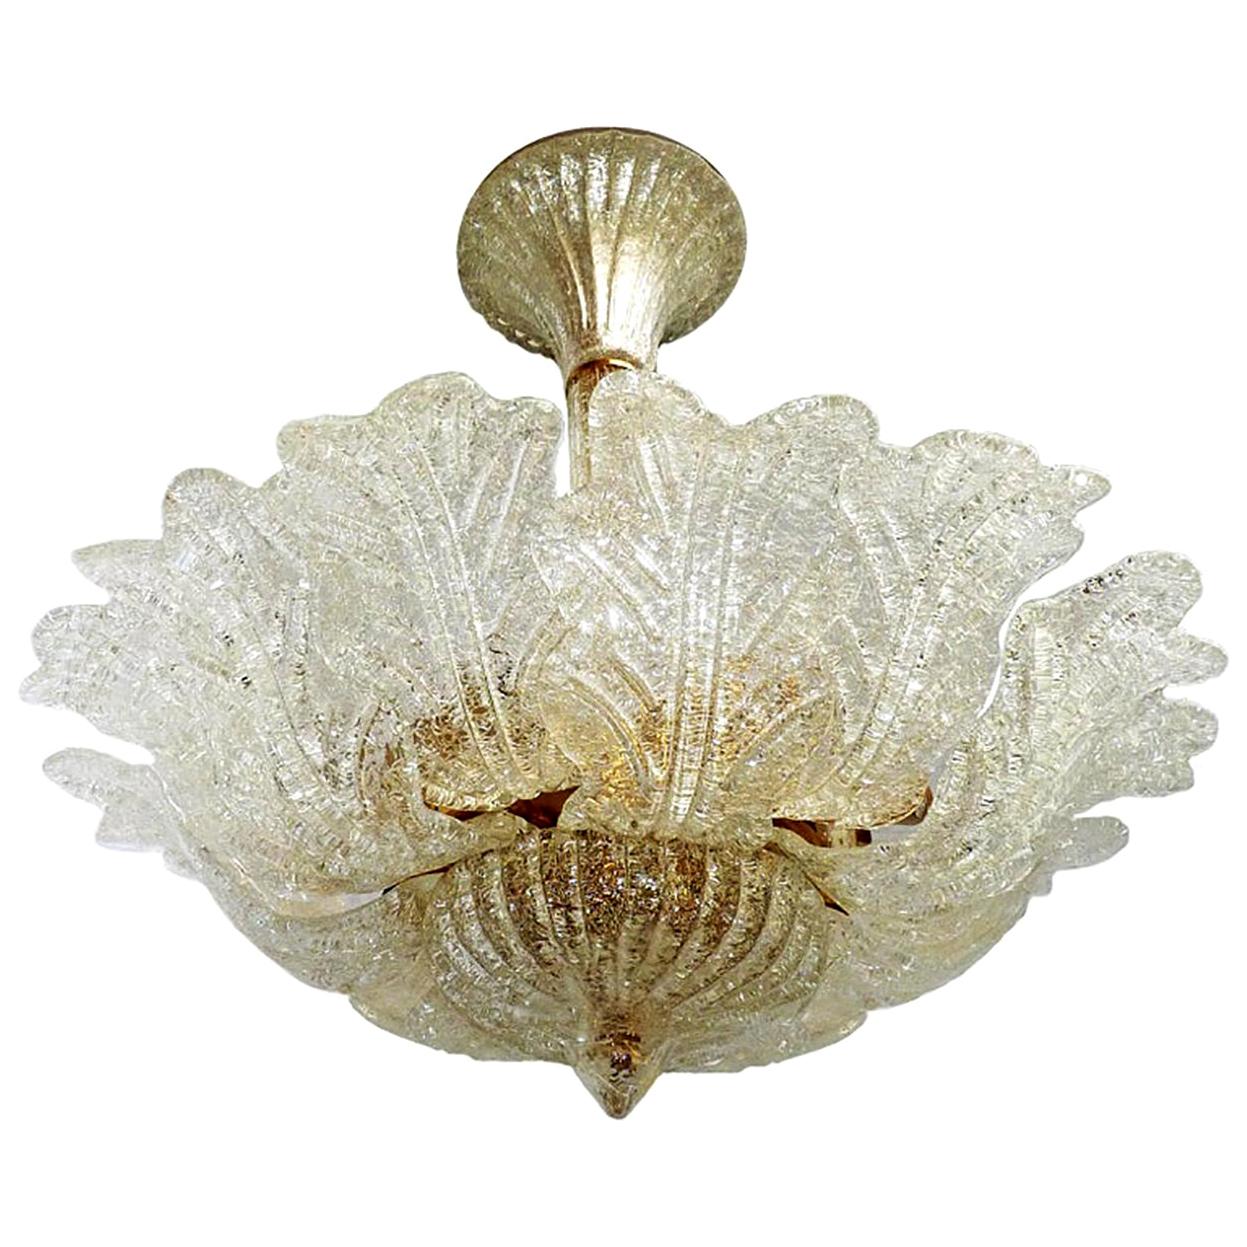 Gorgeous Italian Murano glass flush mount attributed to Venini with hand blown textured glass
Measures:
Diameter 66 cm
Height 66 cm
Eight light bulbs E 14/ Good working condition.
Weight - 12 Kg/ 28 lb.
Assembly required. Bulbs not included.